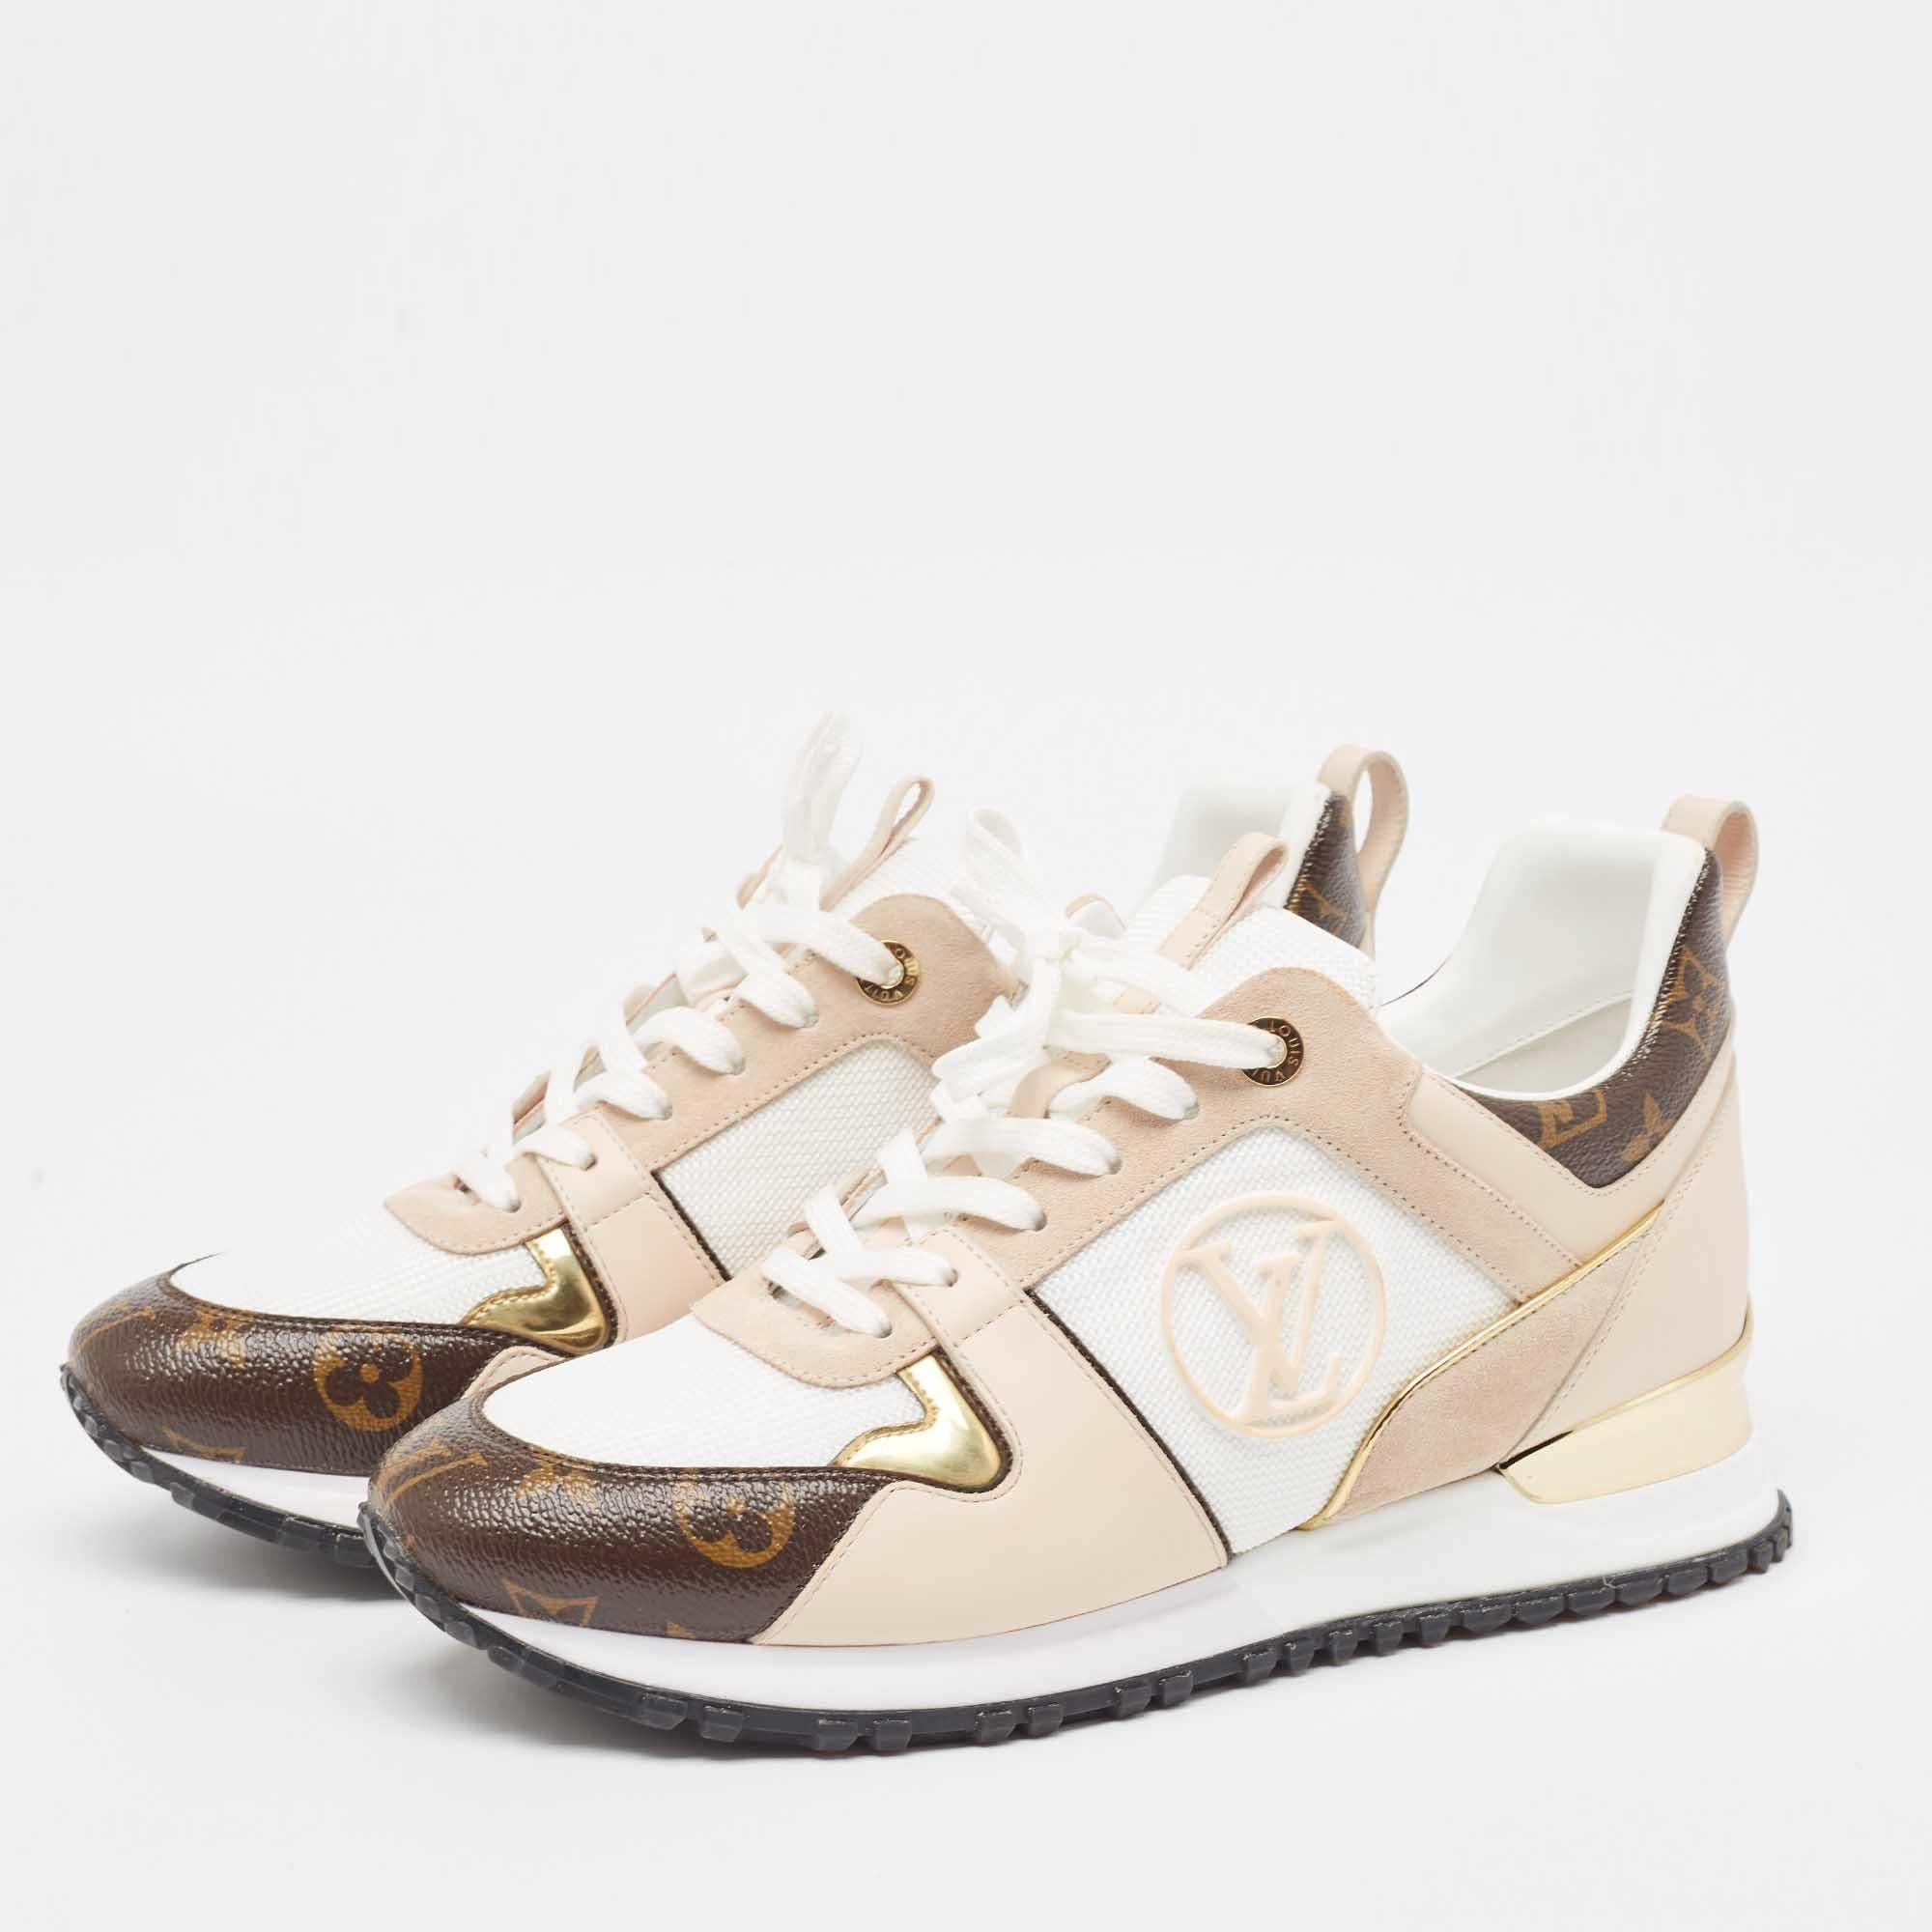 Made to provide comfort, these Run Away sneakers by Louis Vuitton are trendy and stylish. They've been crafted from white leather, brown monogram canvas, and mesh and designed with round toes, lace-ups on the vamps, and brand logo details on the